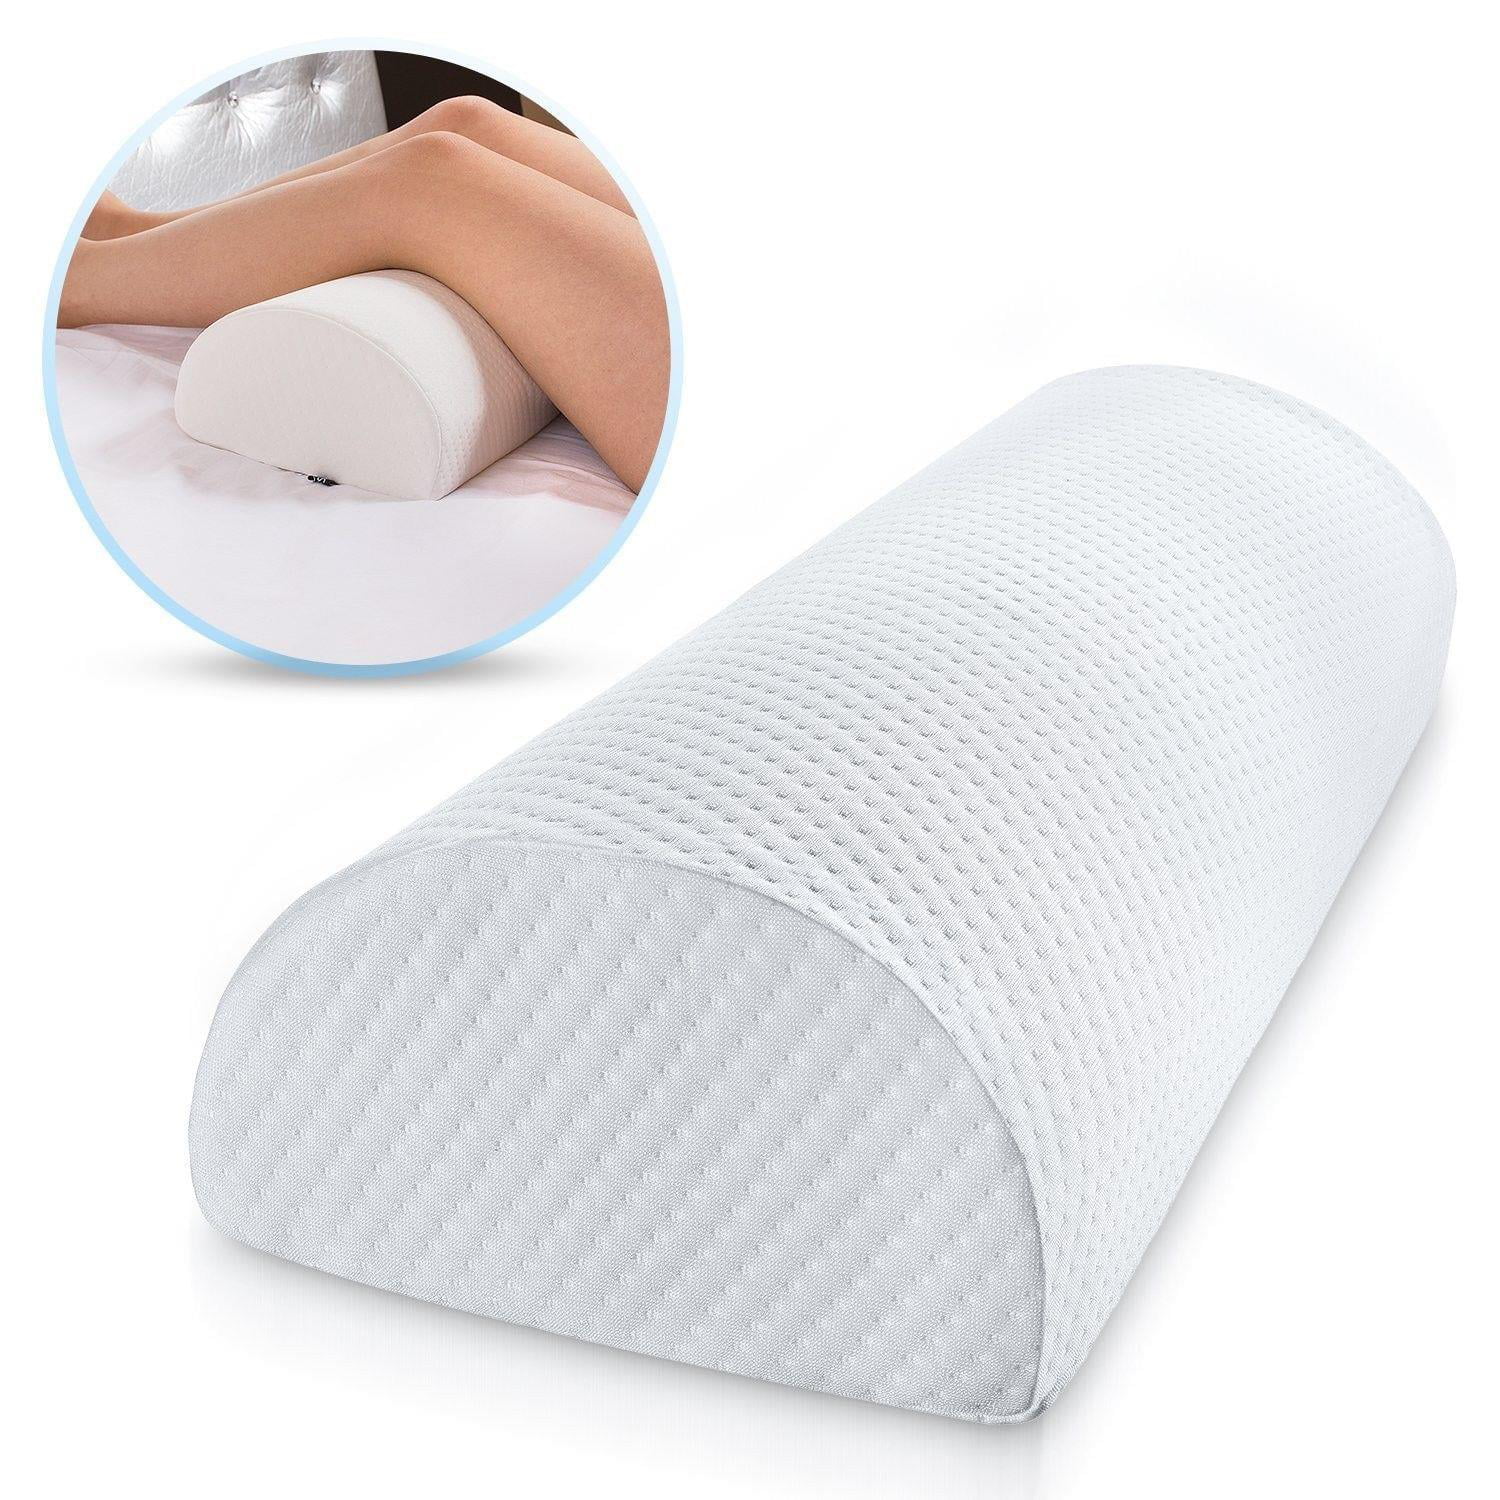 SoftLarge  Body Back Pillow Neck Spine Knee Support Comfort Sleeping 20 x 54 In 